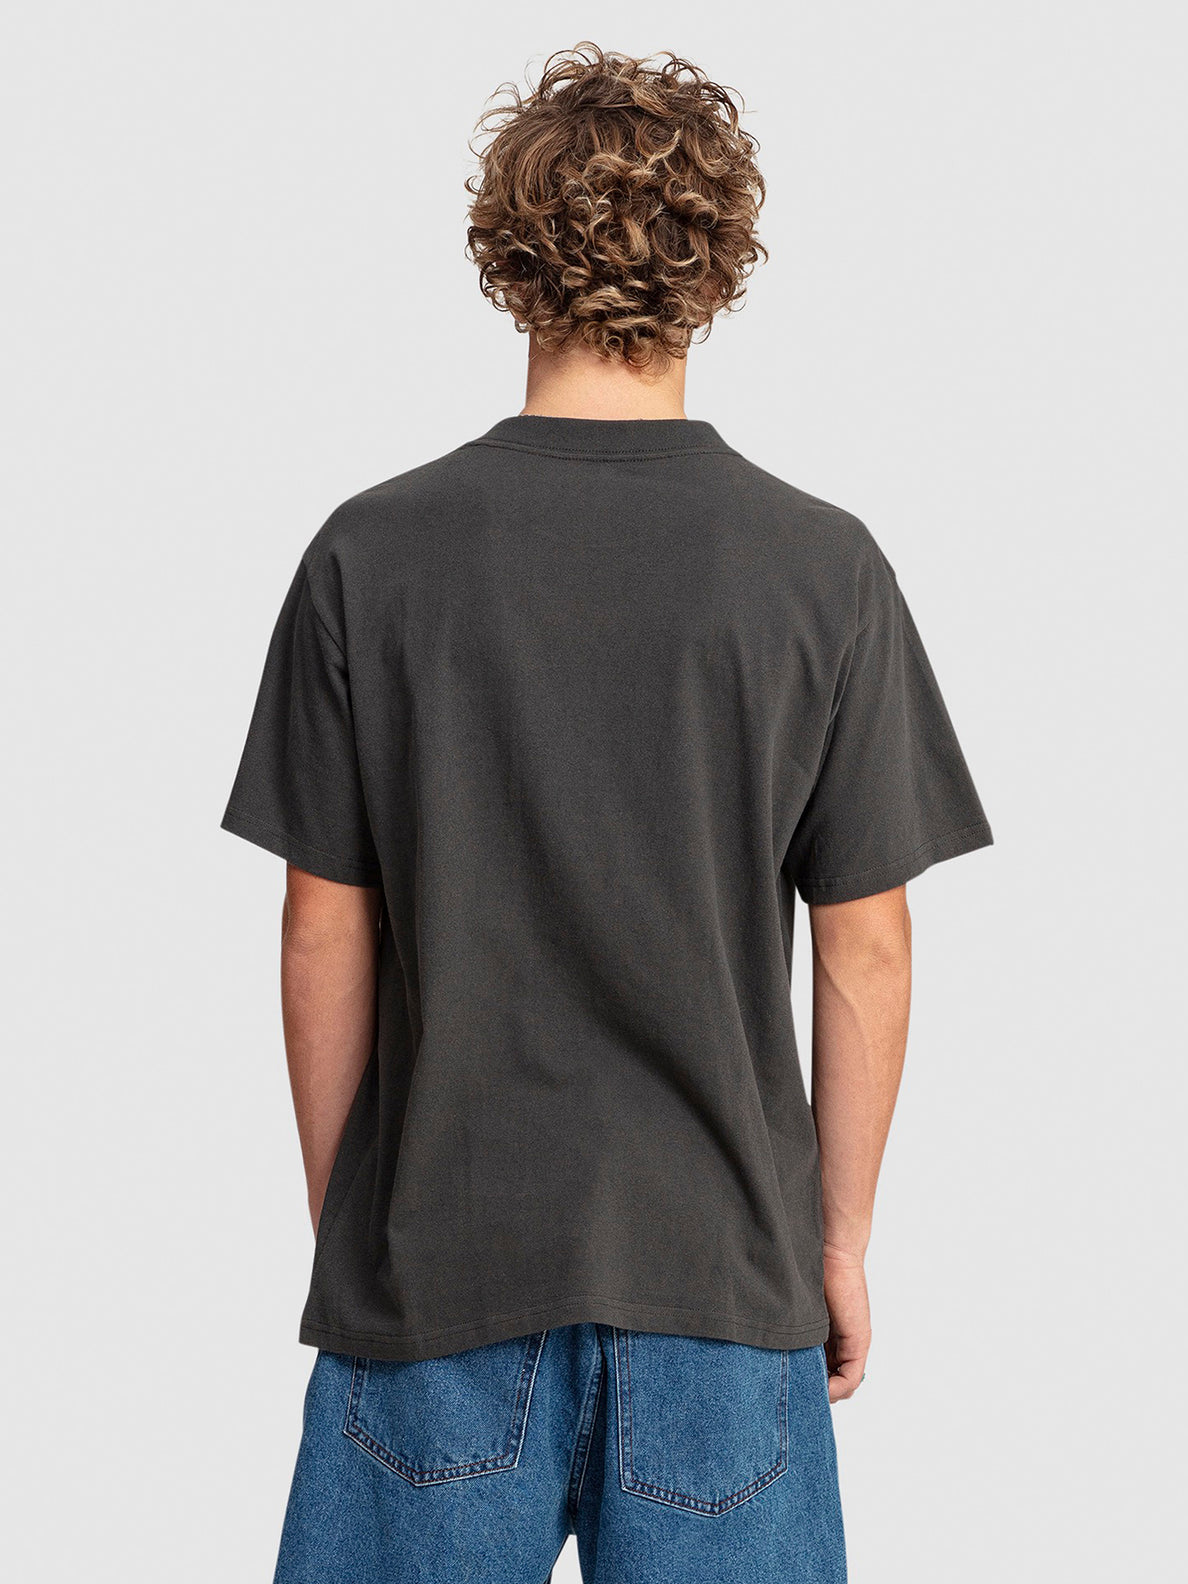 Vellipse Short Sleeve T-Shirt - Stealth (A4342376_STH) [B]